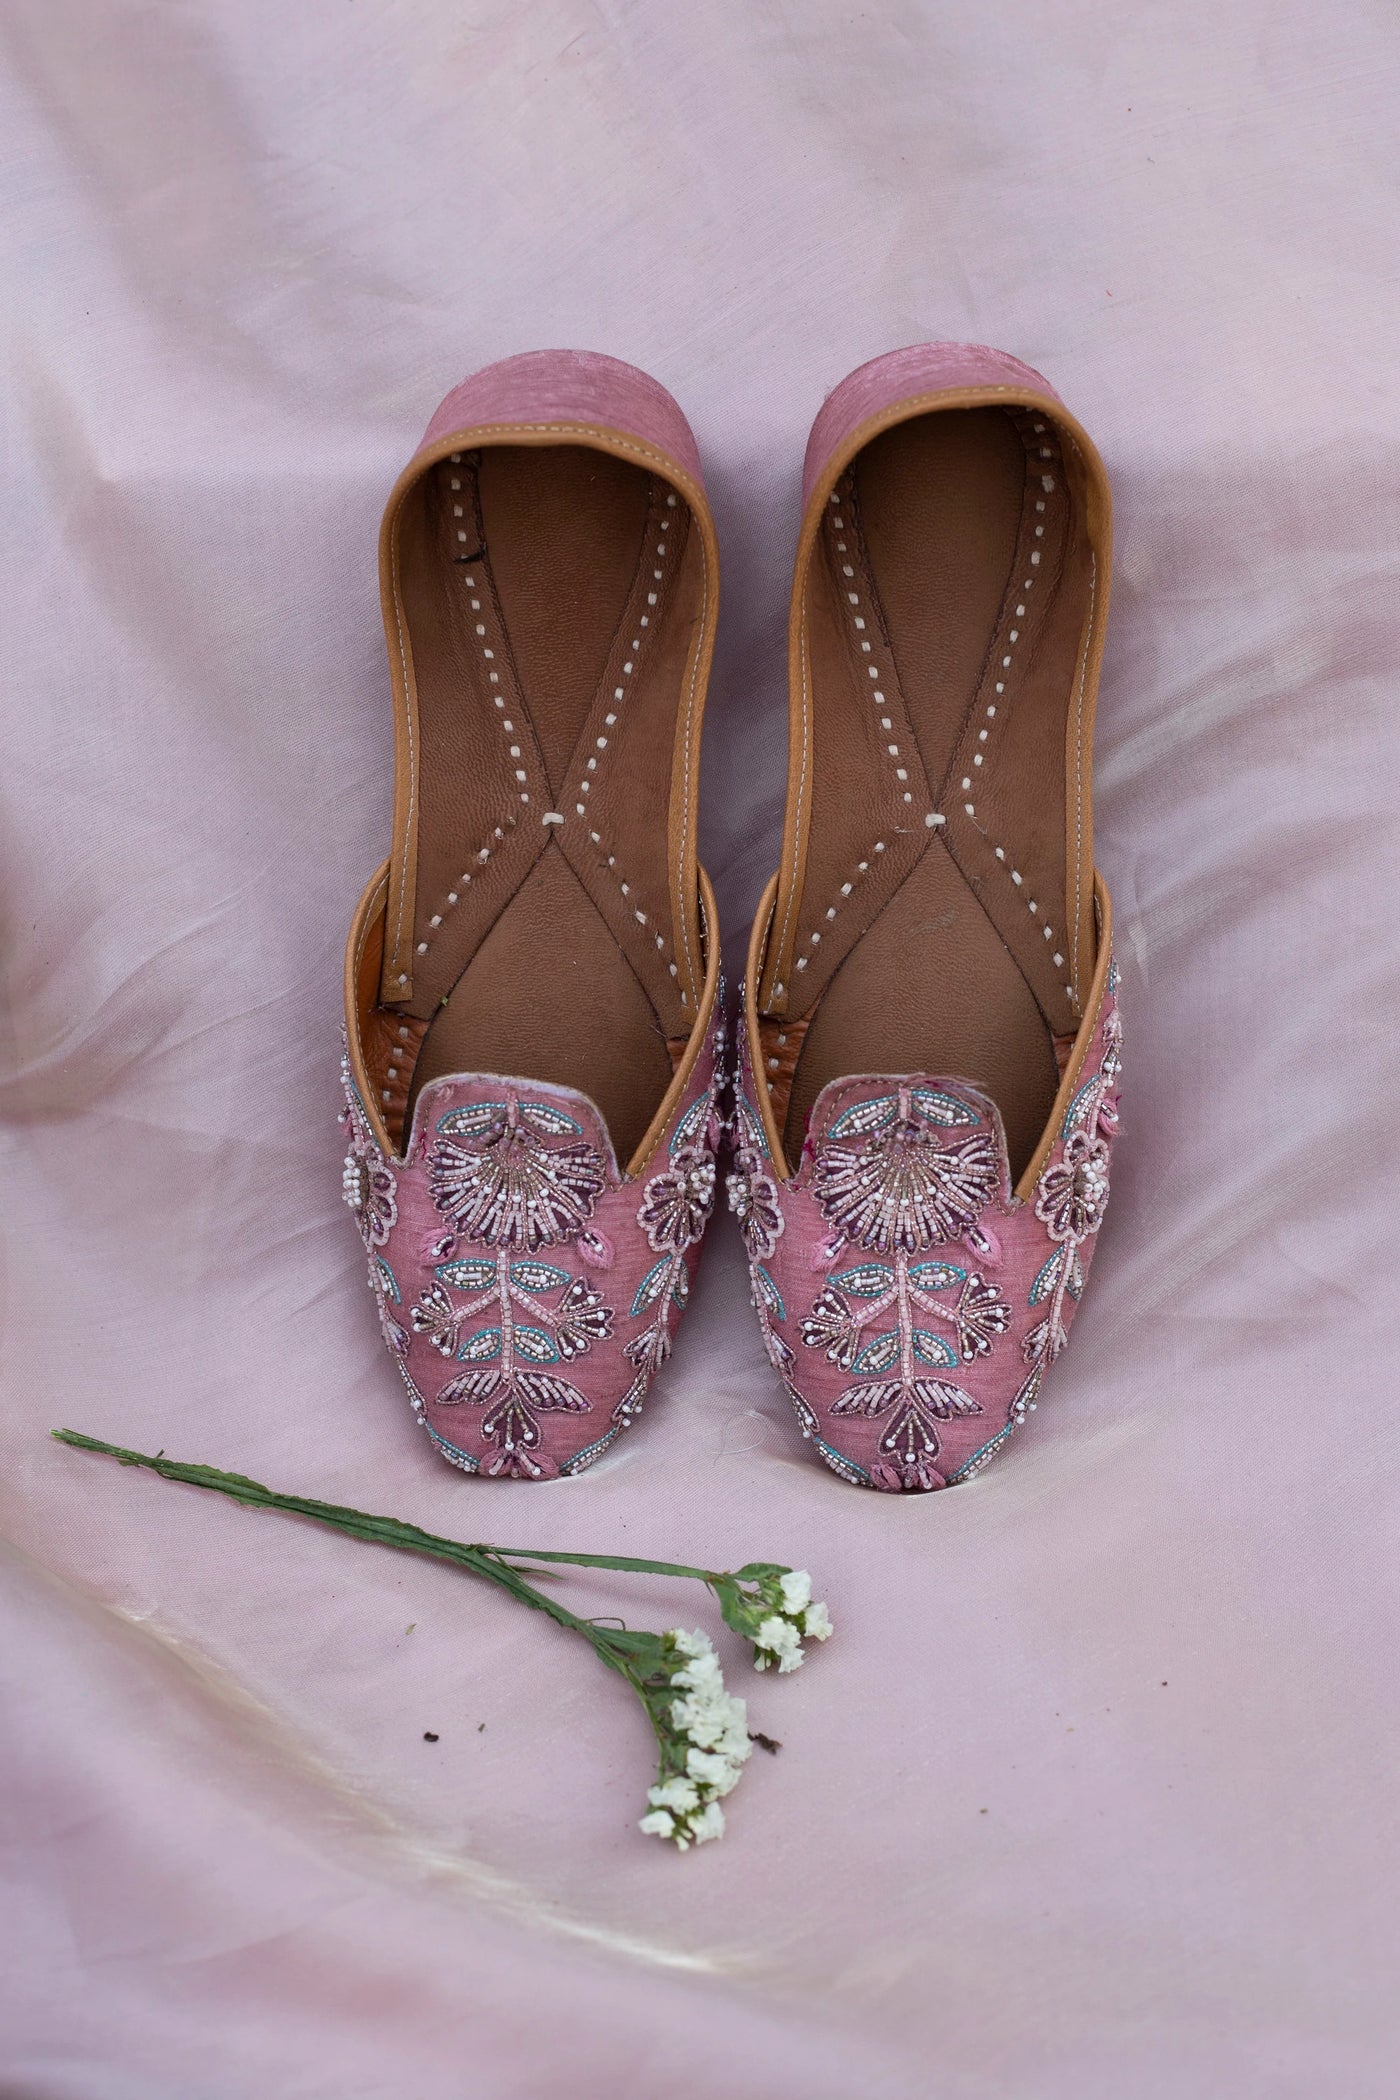 Baby Blush Embroidered Juttis Indian Clothing in Denver, CO, Aurora, CO, Boulder, CO, Fort Collins, CO, Colorado Springs, CO, Parker, CO, Highlands Ranch, CO, Cherry Creek, CO, Centennial, CO, and Longmont, CO. NATIONWIDE SHIPPING USA- India Fashion X